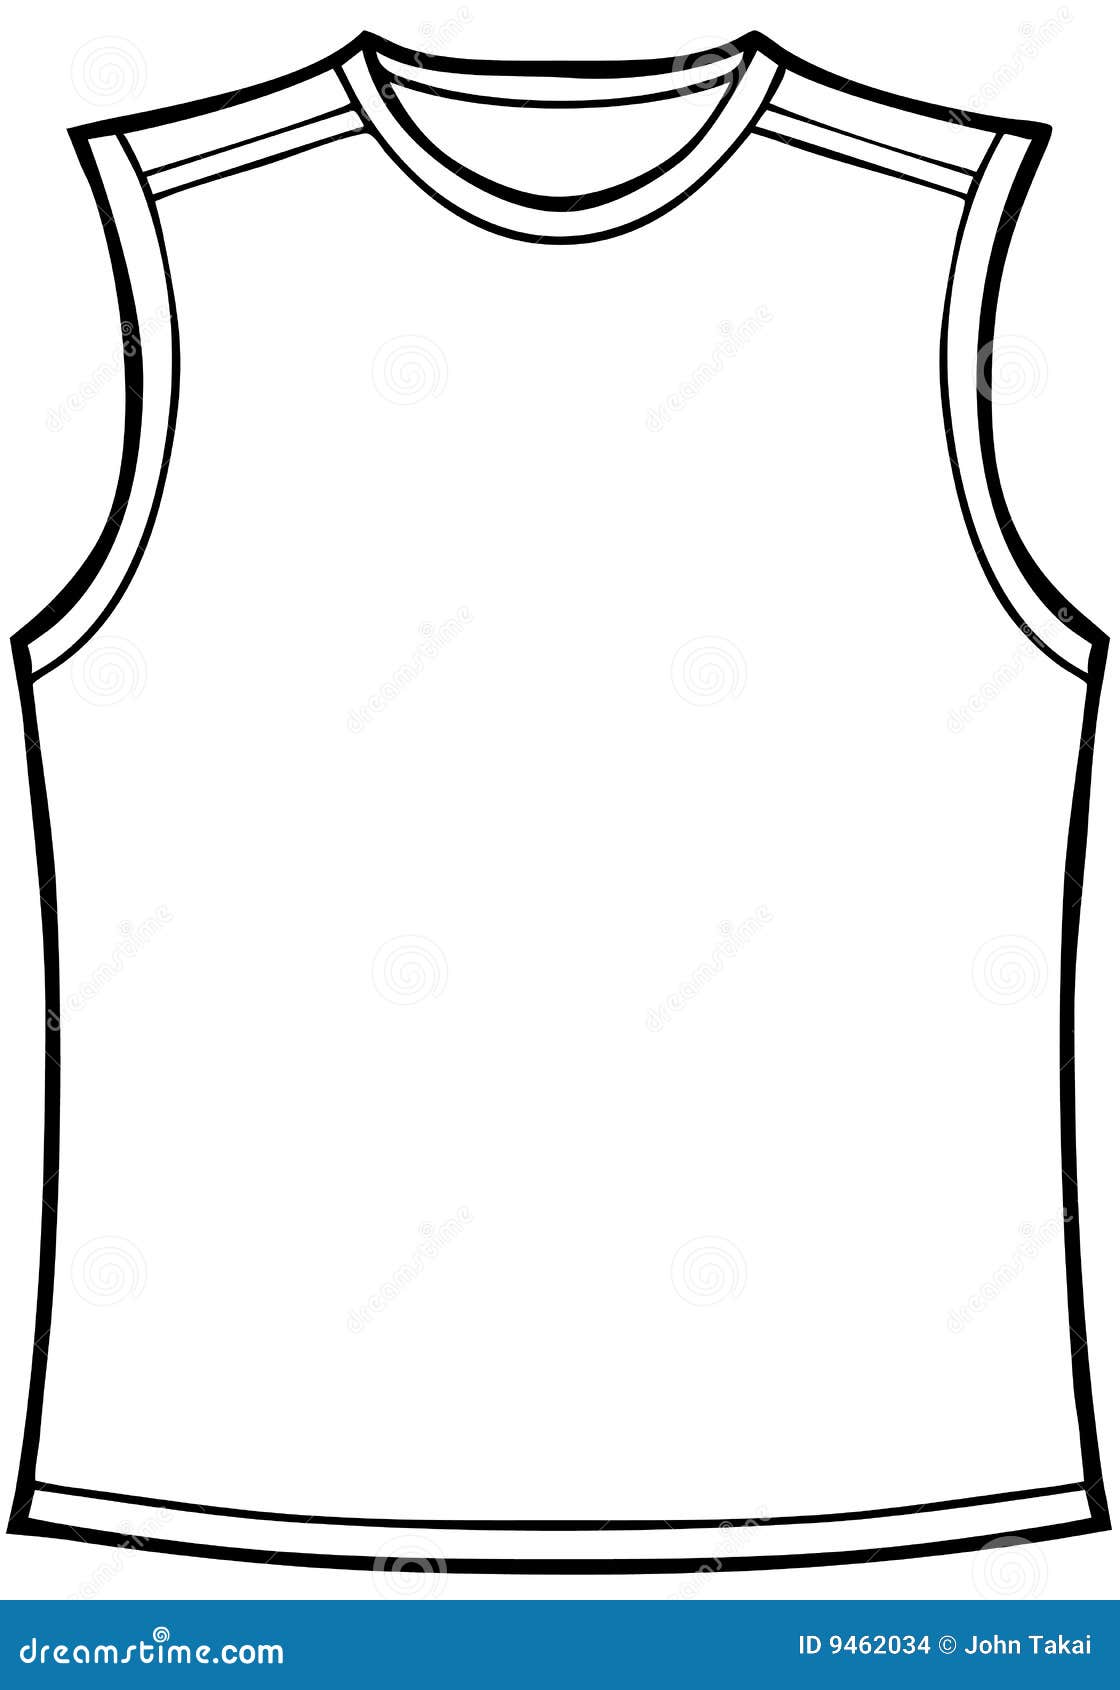 basketball clipart for t shirts - photo #27